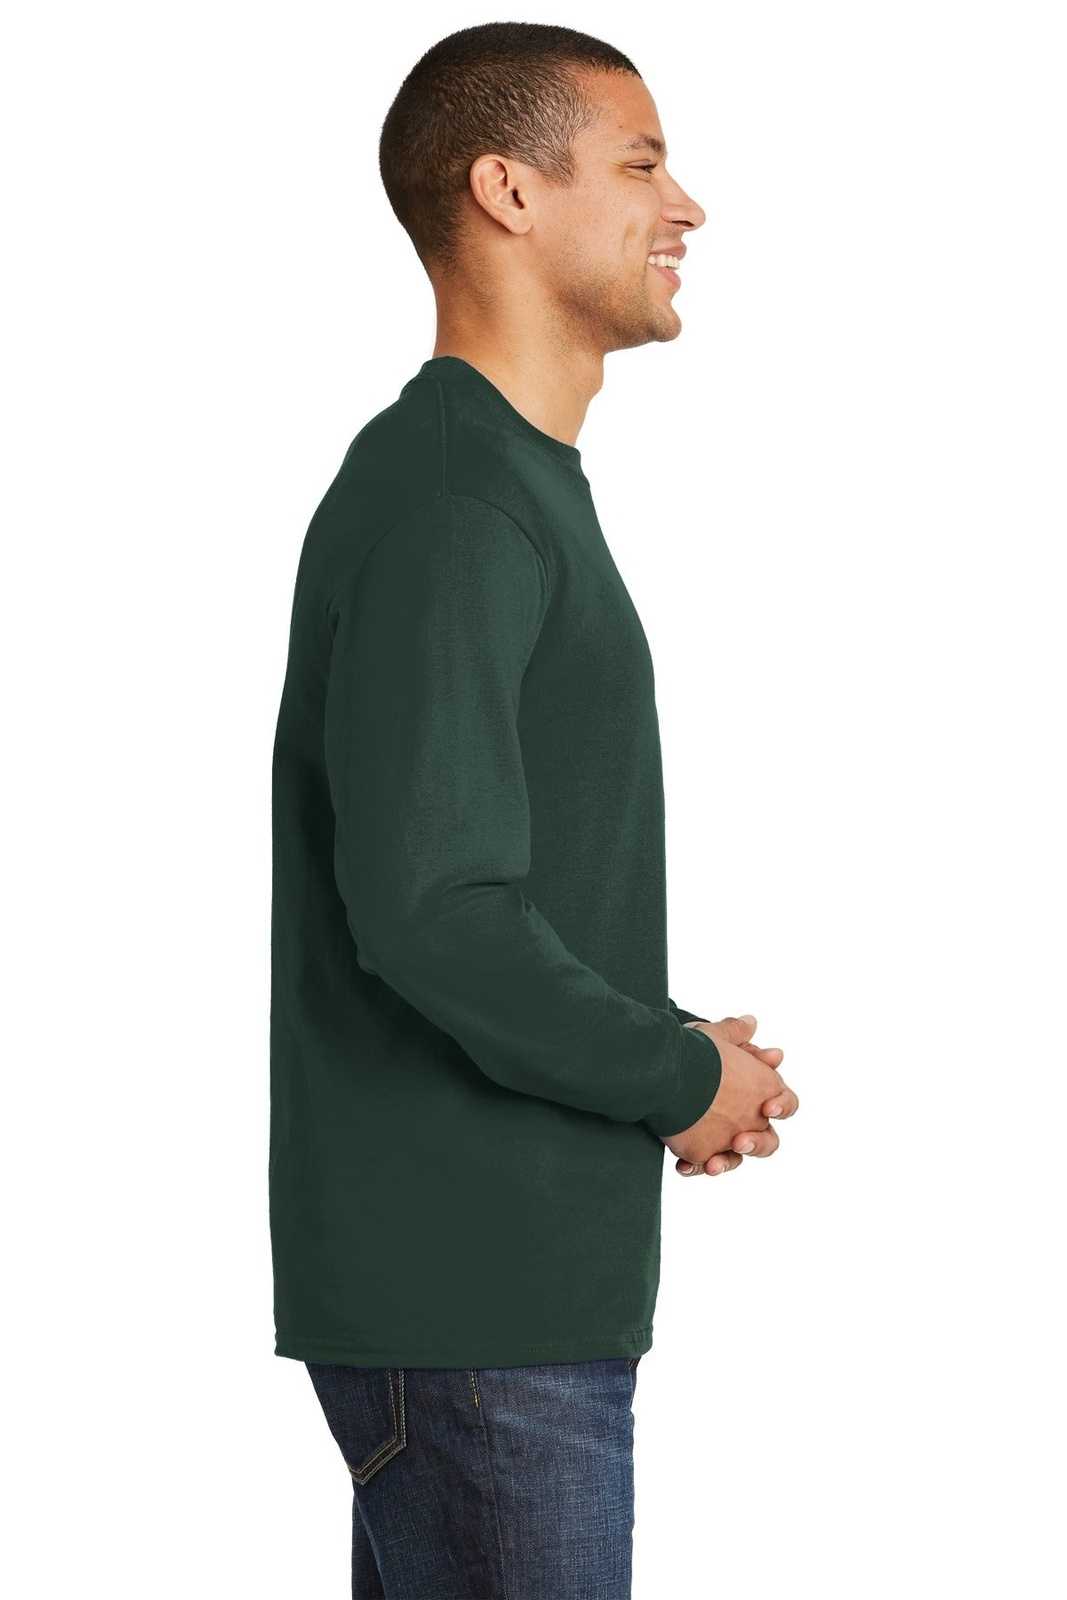 Hanes 5186 Beefy-T 100% Cotton Long Sleeve T-Shirt - Deep Forest - HIT a Double